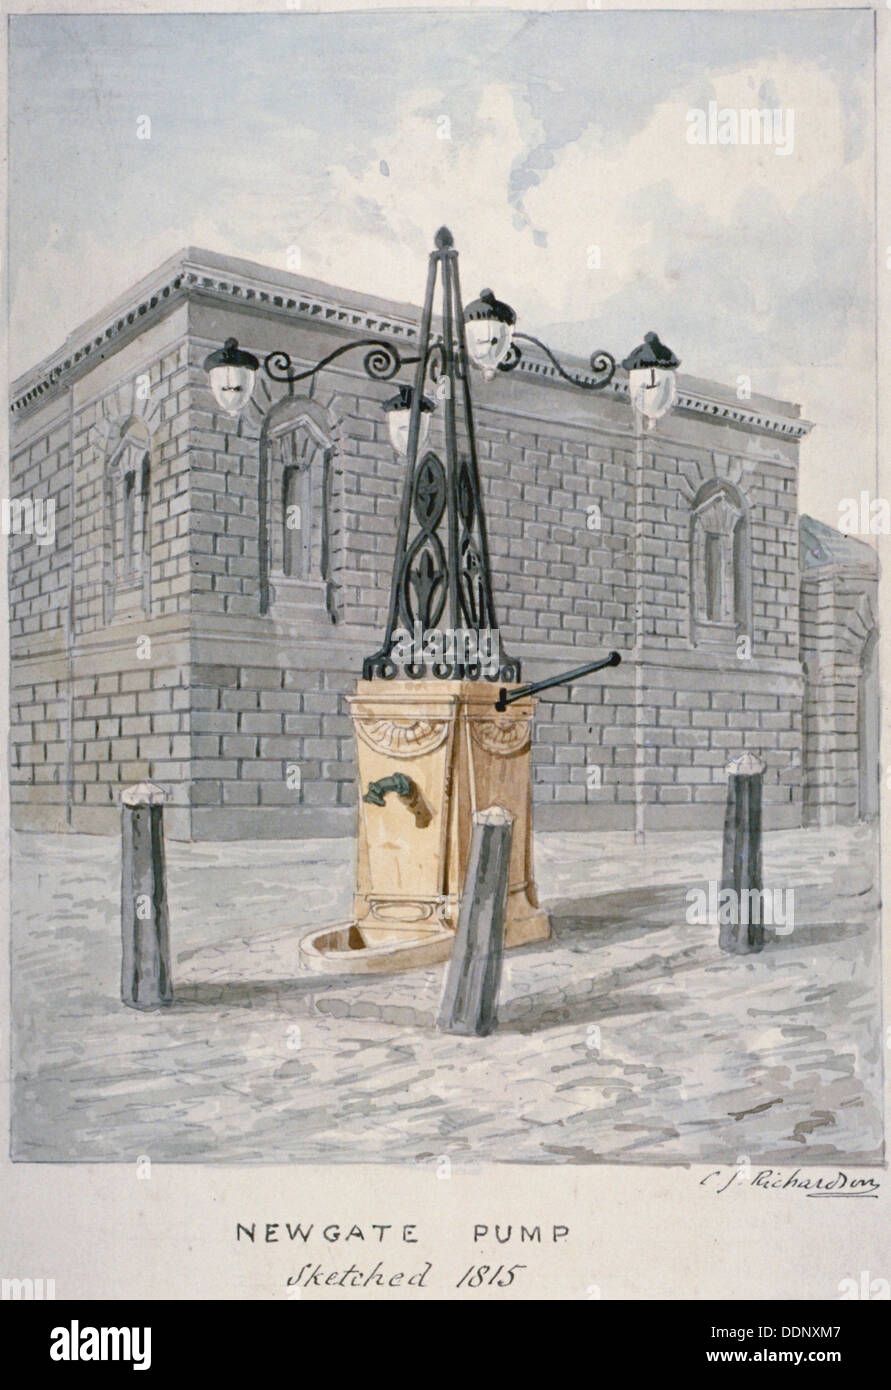 Newgate Pump, Old Bailey with Newgate Prison in the background, City of London, 1815. Artist: Charles James Richardson Stock Photo